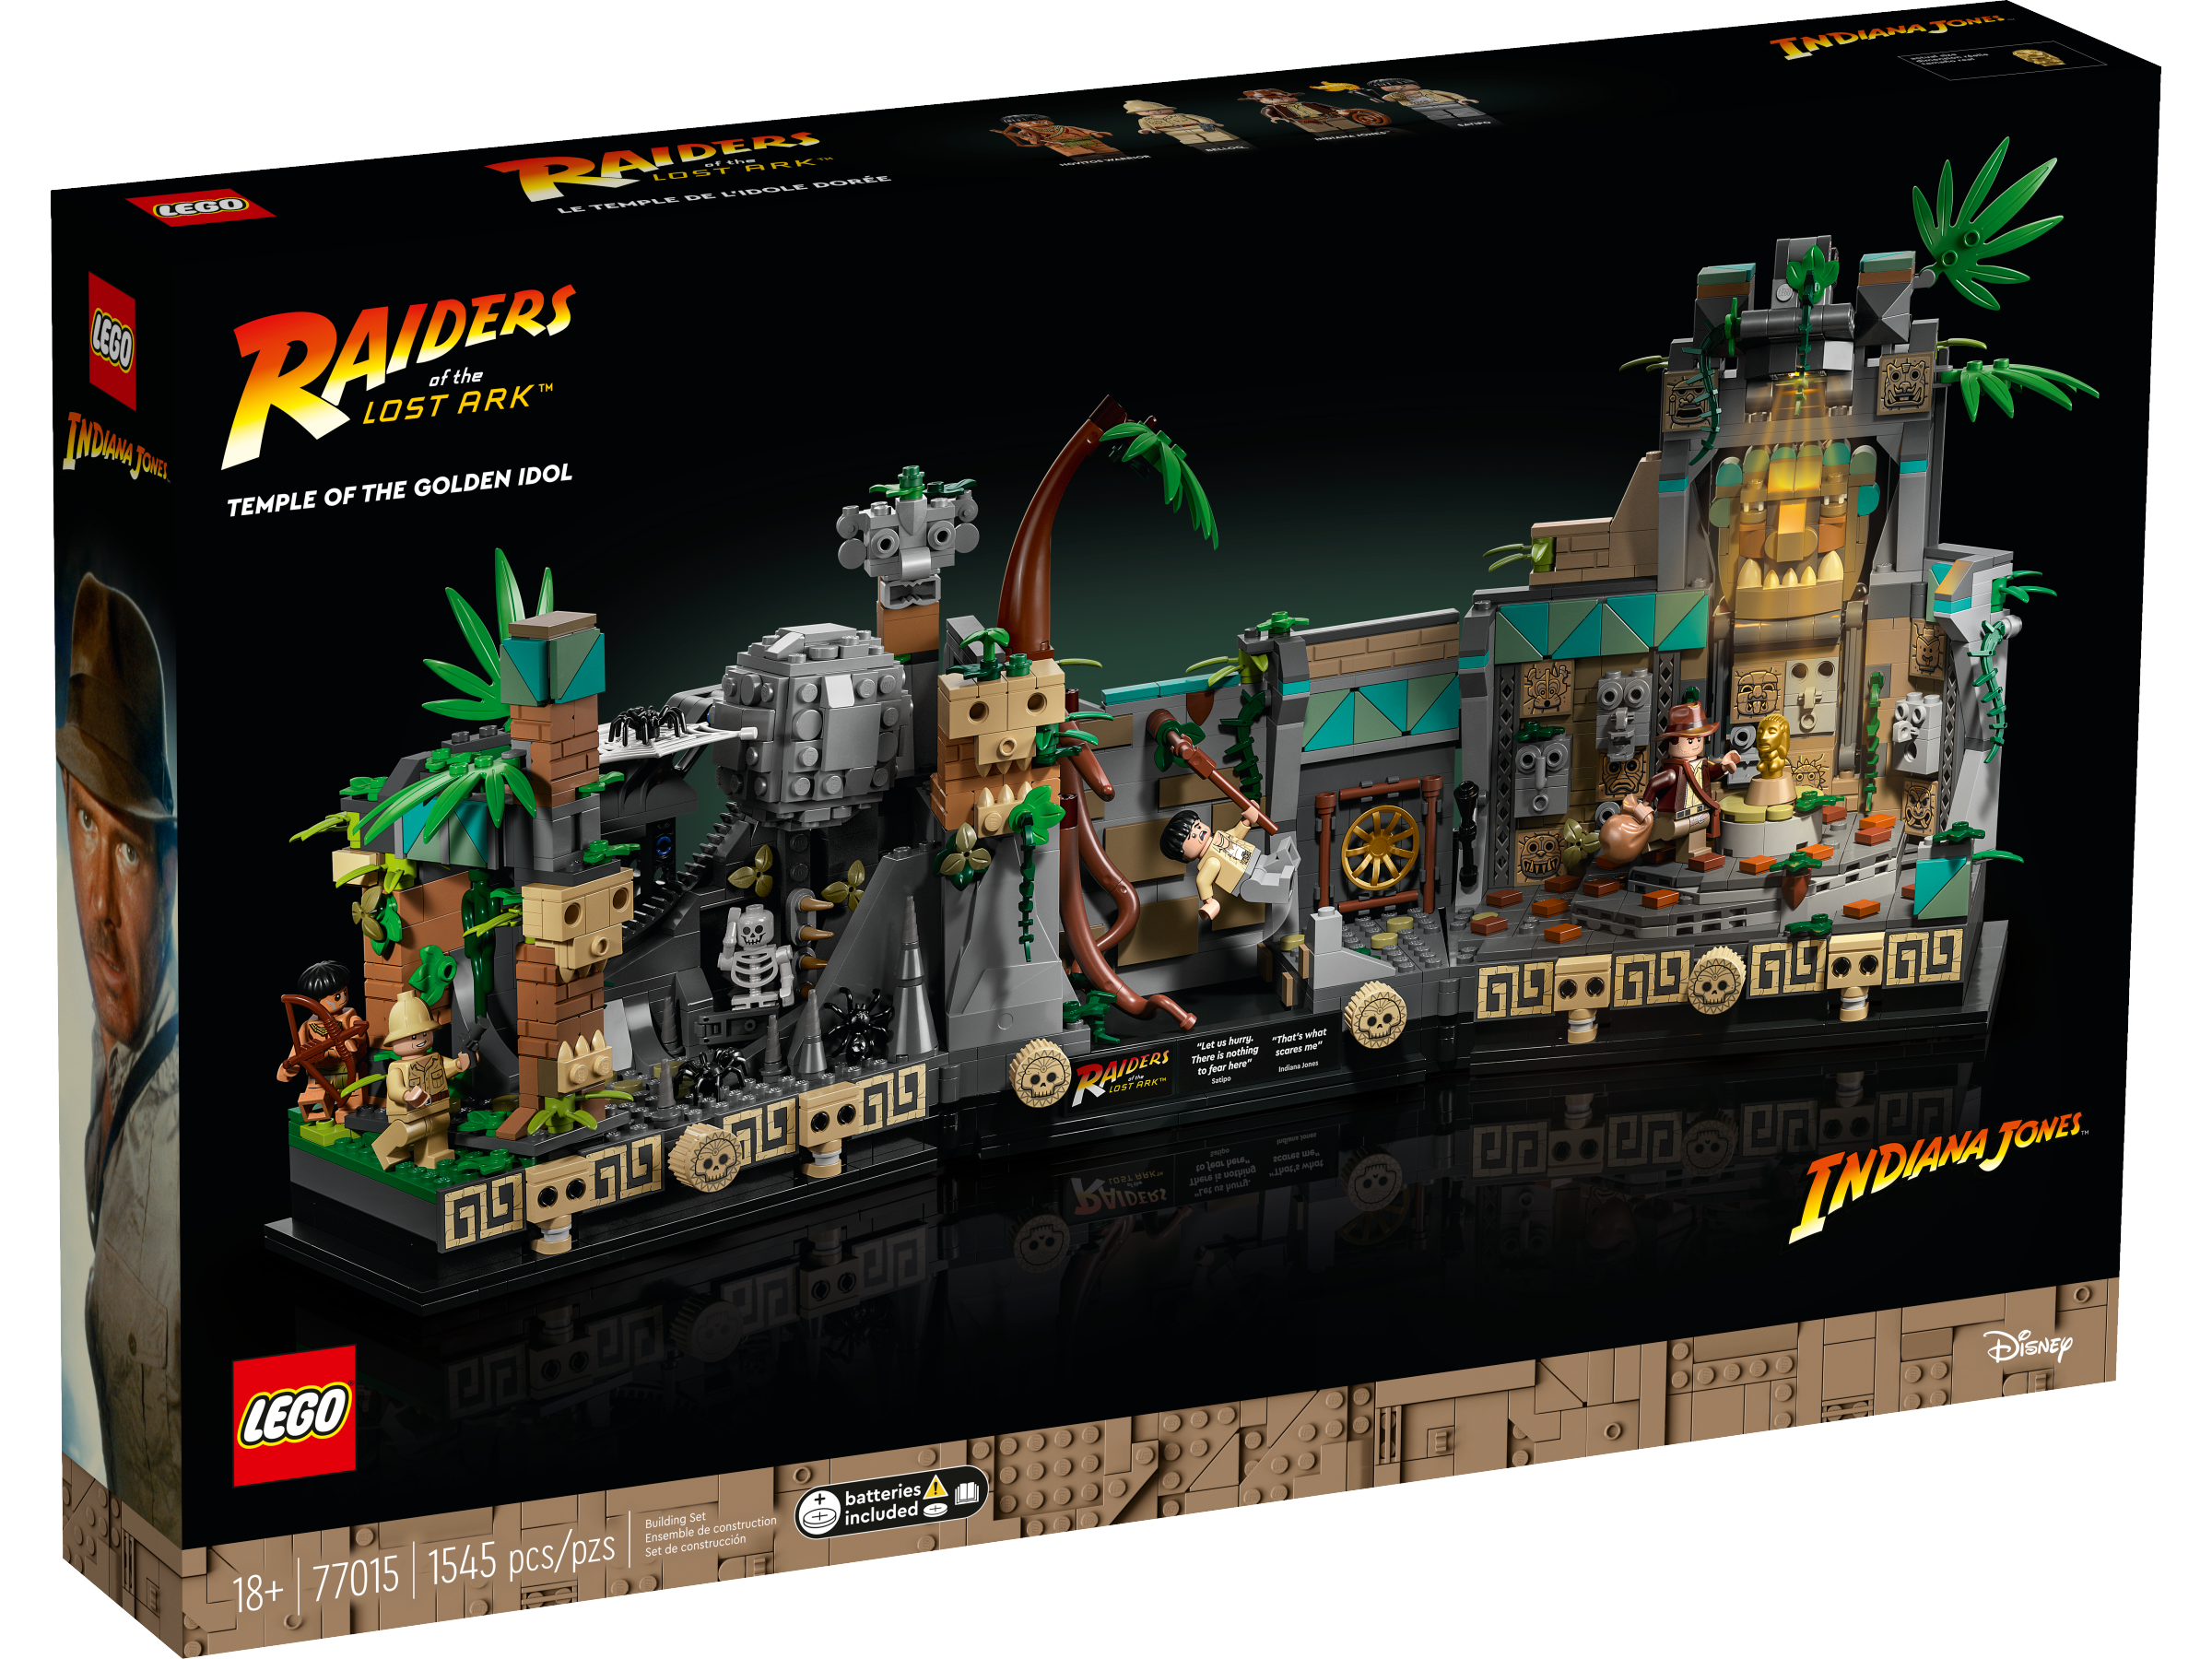 LEGO releases statement on cancelled Indiana Jones set